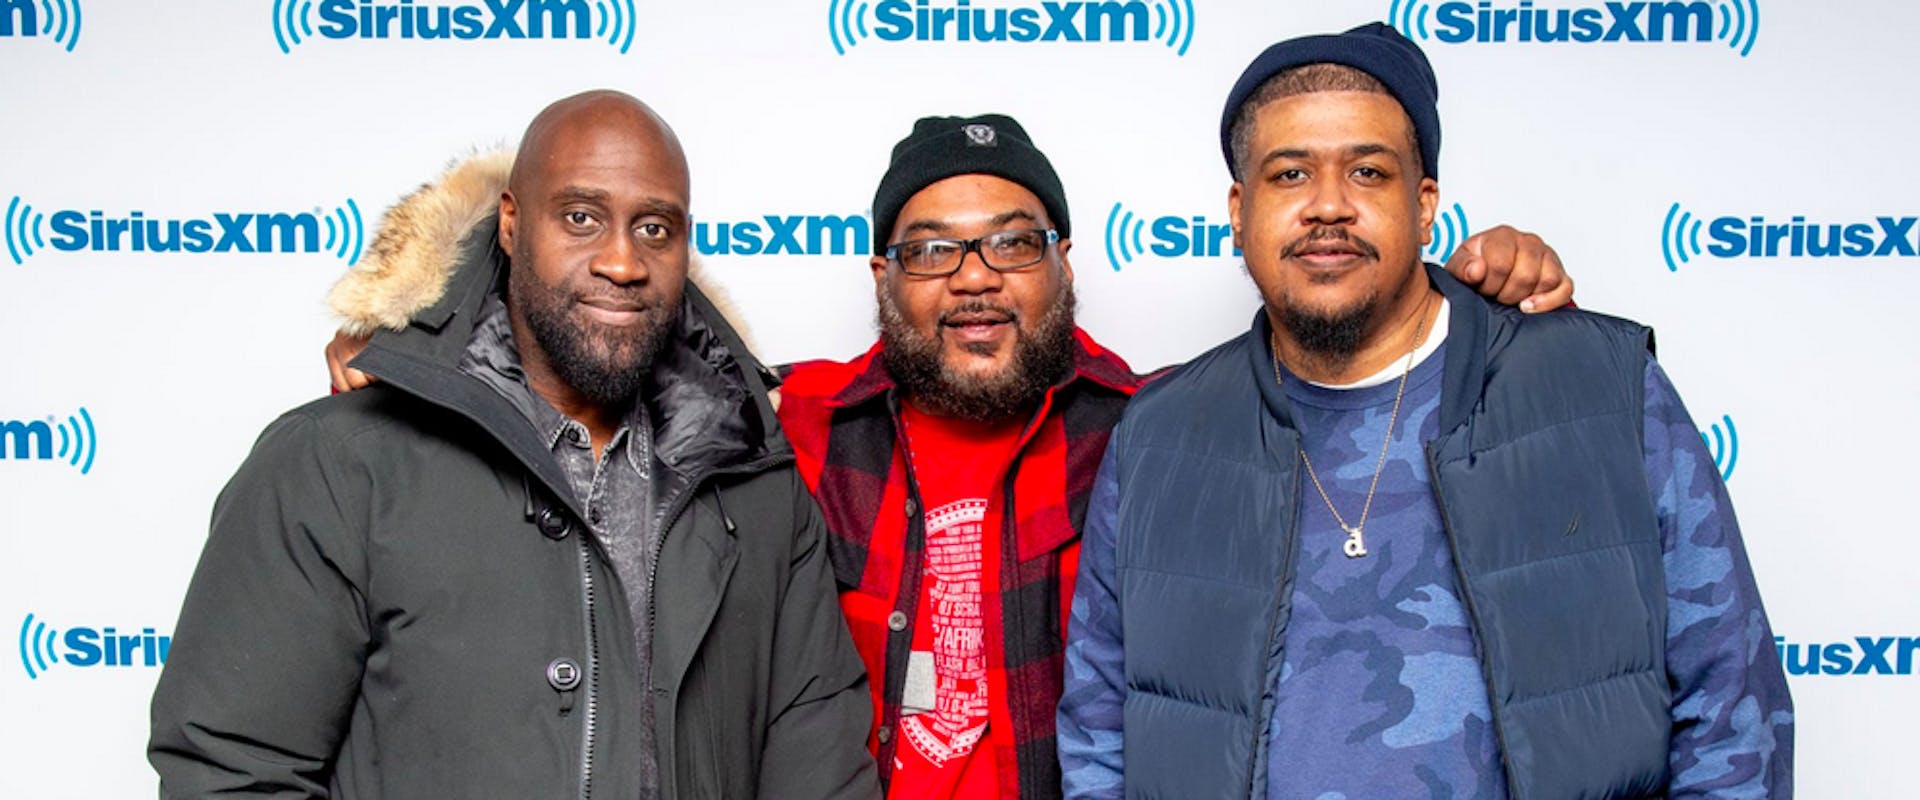 NEW YORK, NEW YORK - FEBRUARY 26: (L-R) Kelvin Mercer, Vincent Mason and David Jude Jolicoeur os De La Soul visit "Sway In the Morning" on "Shade 45" with host Sway Calloway at SiriusXM Studios on February 26, 2019 in New York City. 